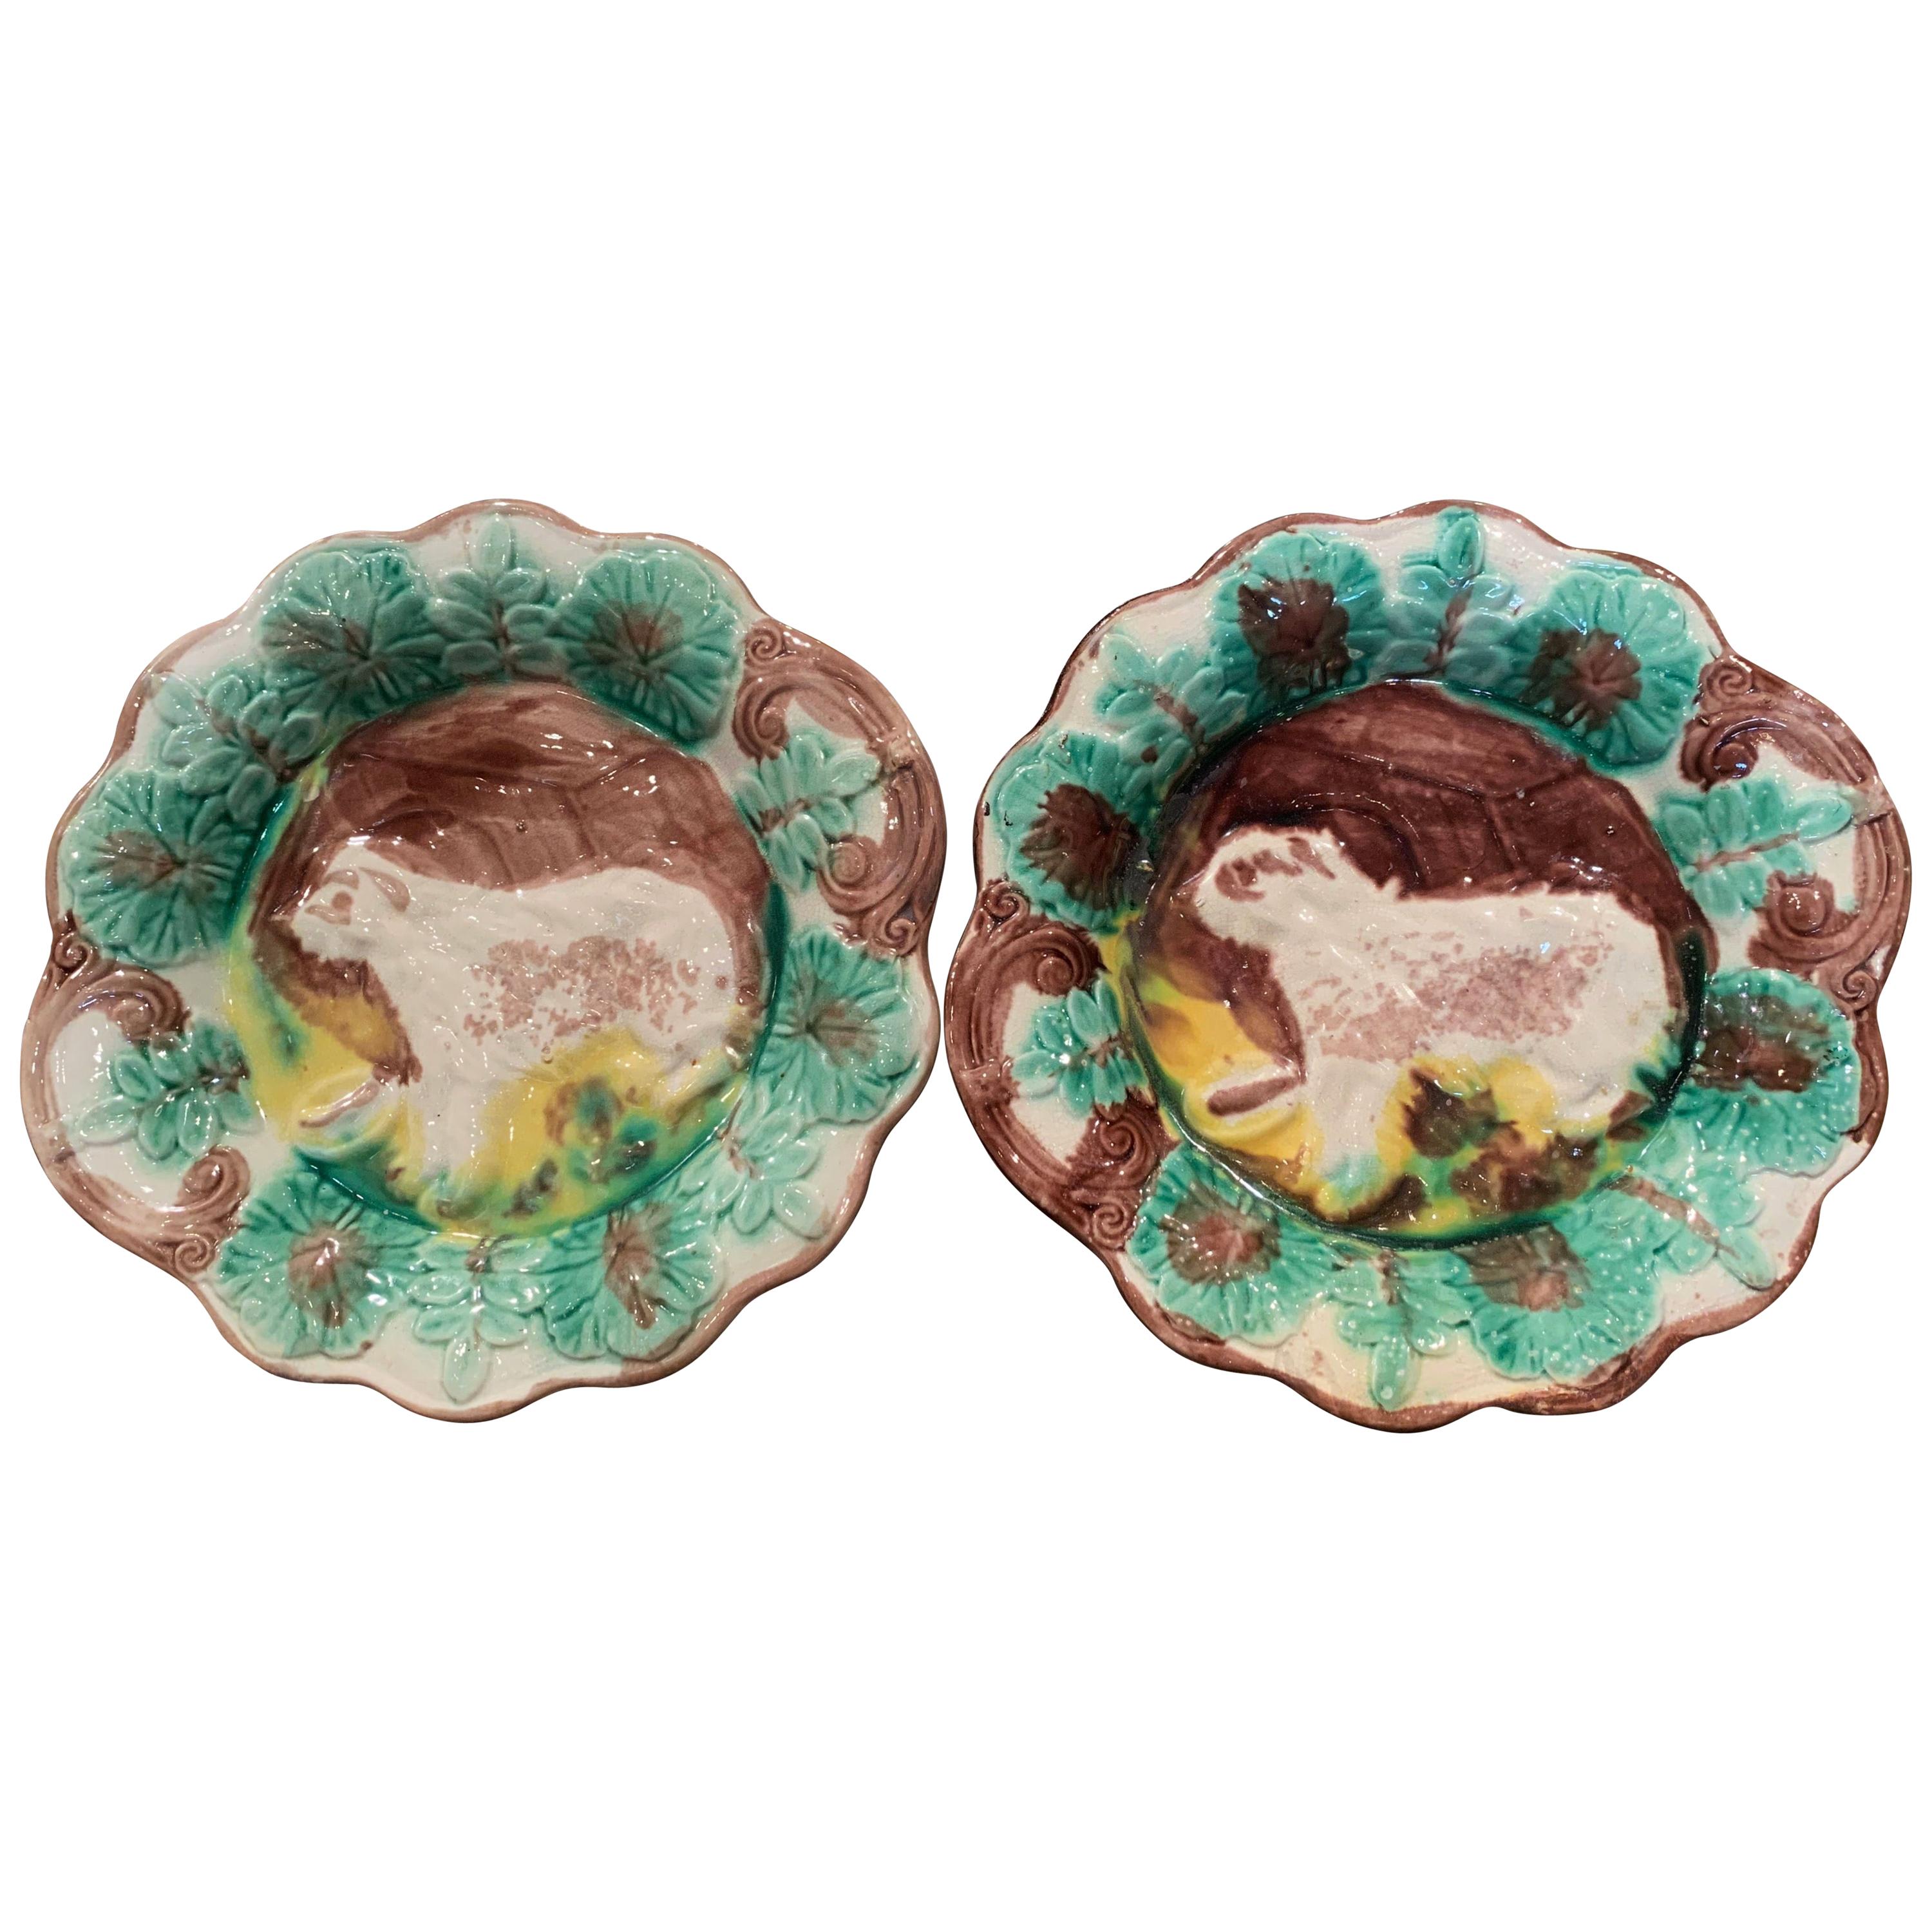 Pair of Early 20th Century French Faience Barbotine Wall Plates with Dog Figures